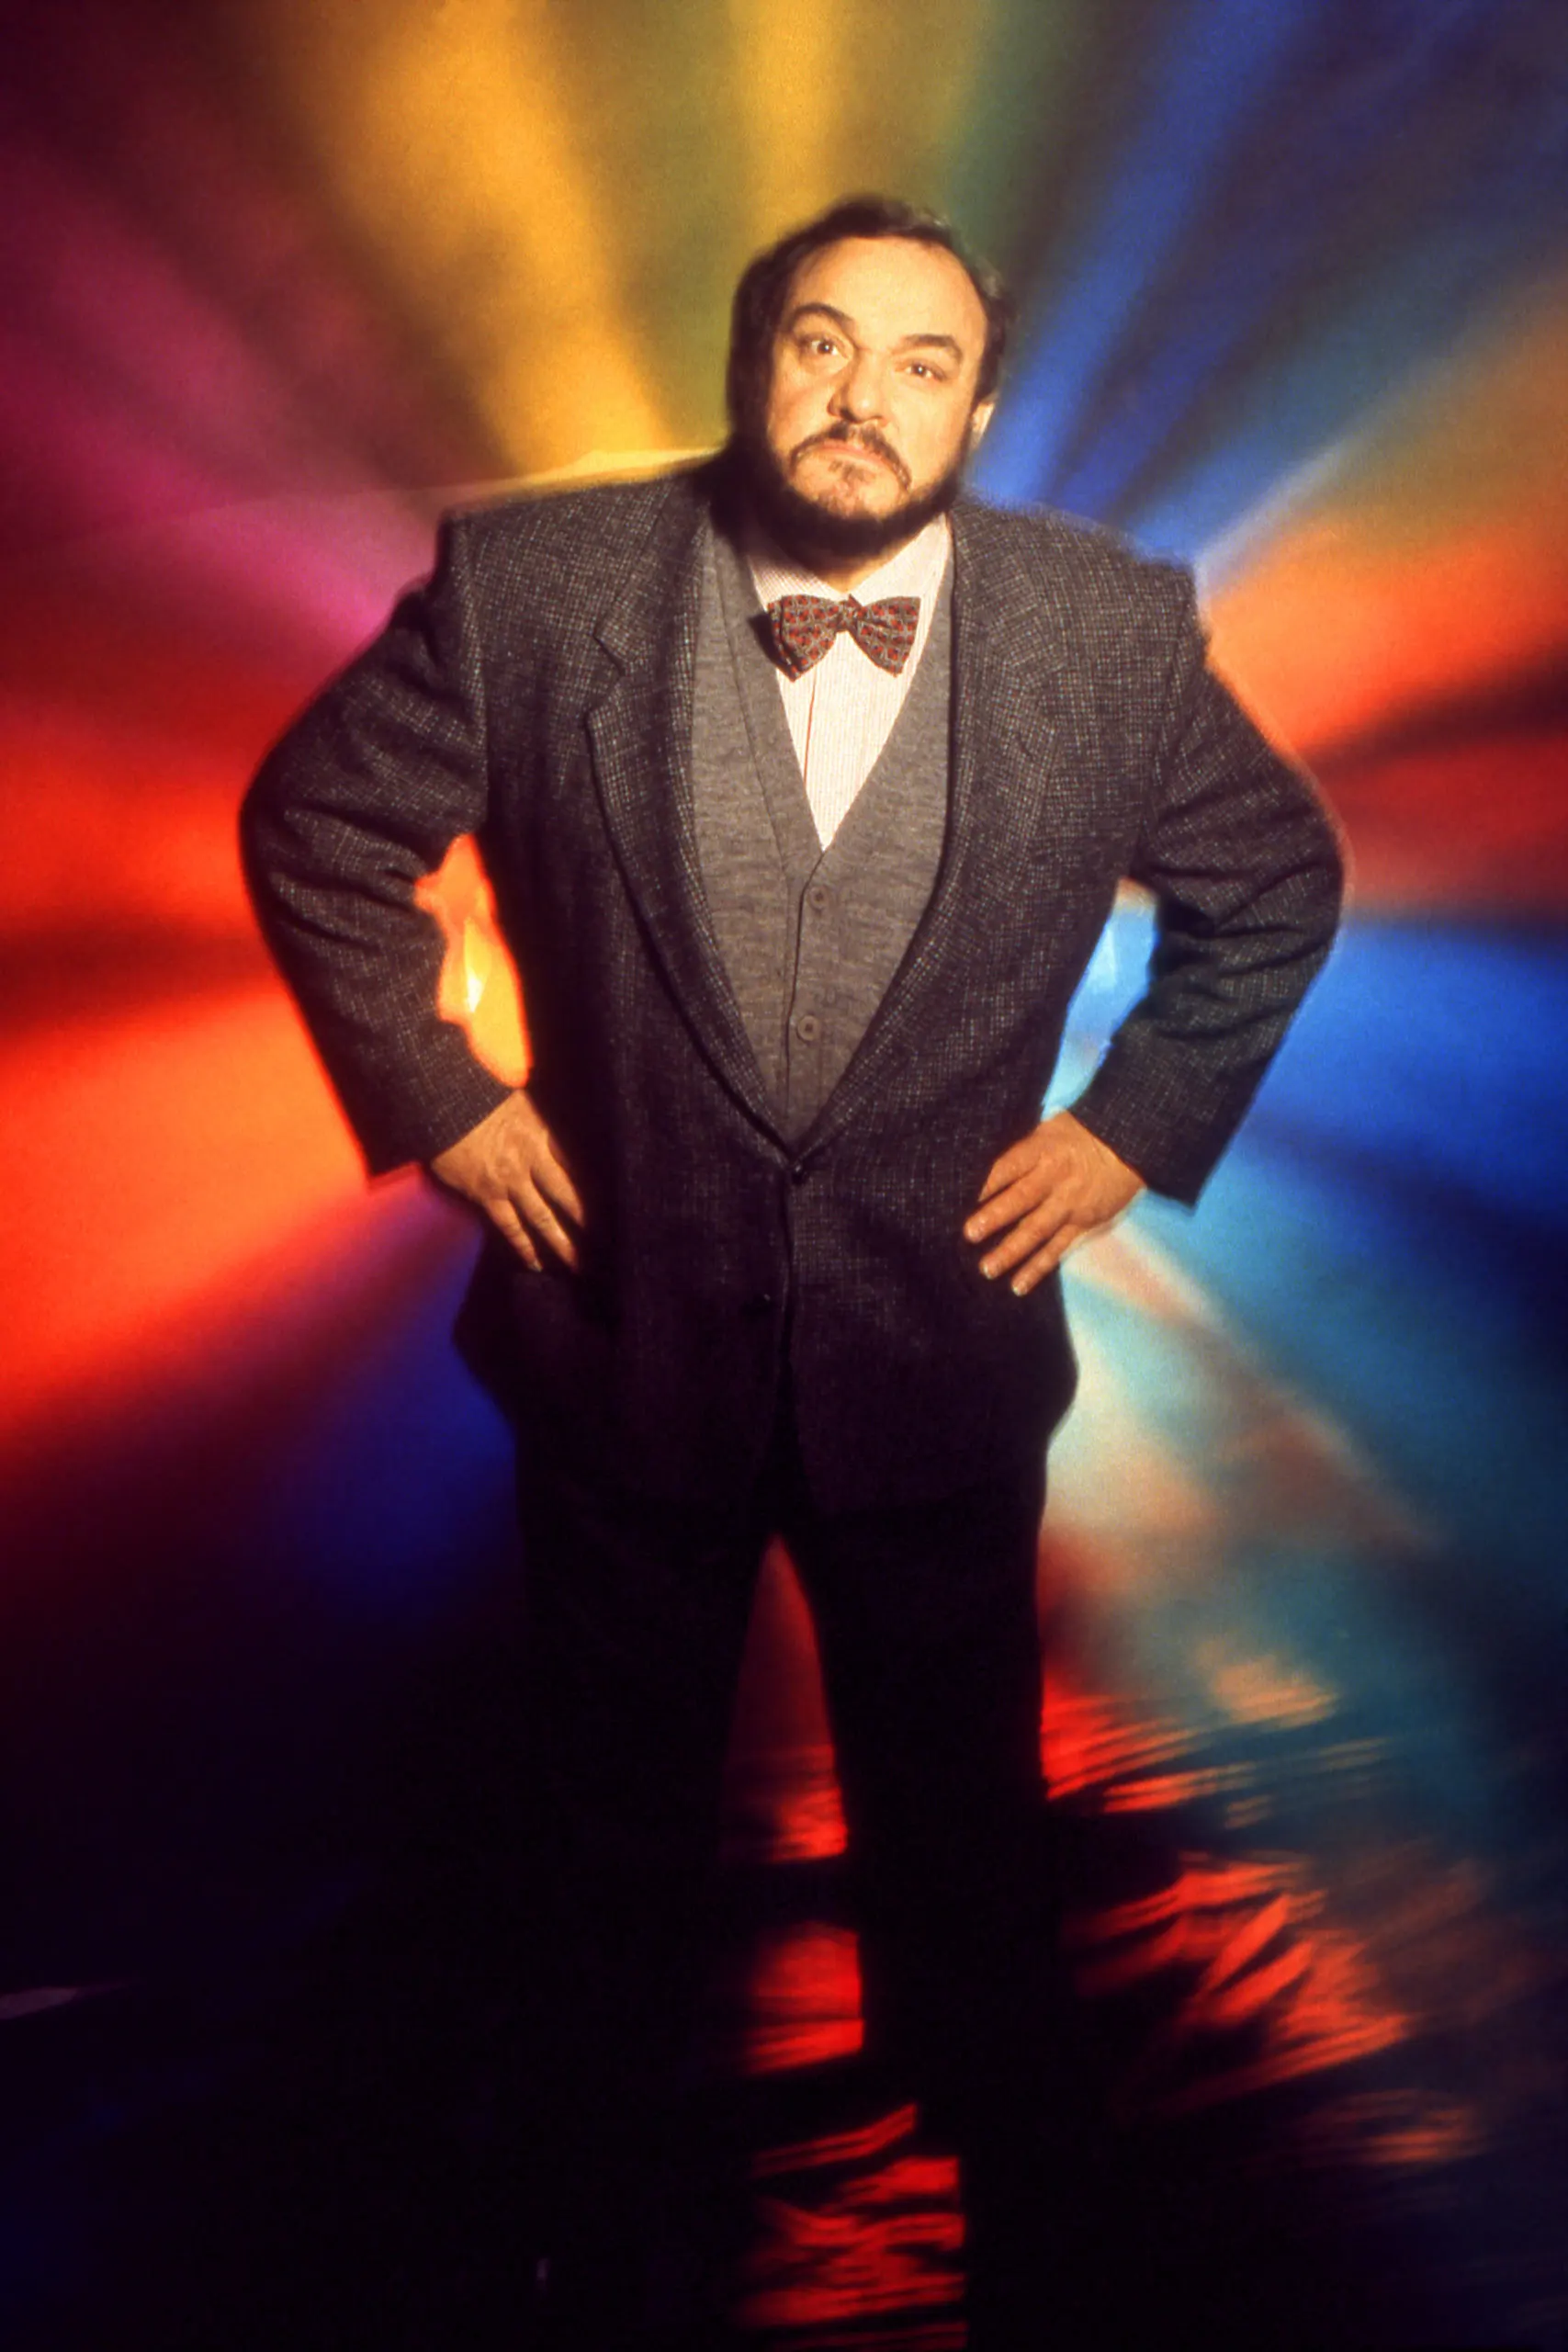 John Rhys-Davies as Professor Maximillian Arturo standing in front of a prism color background